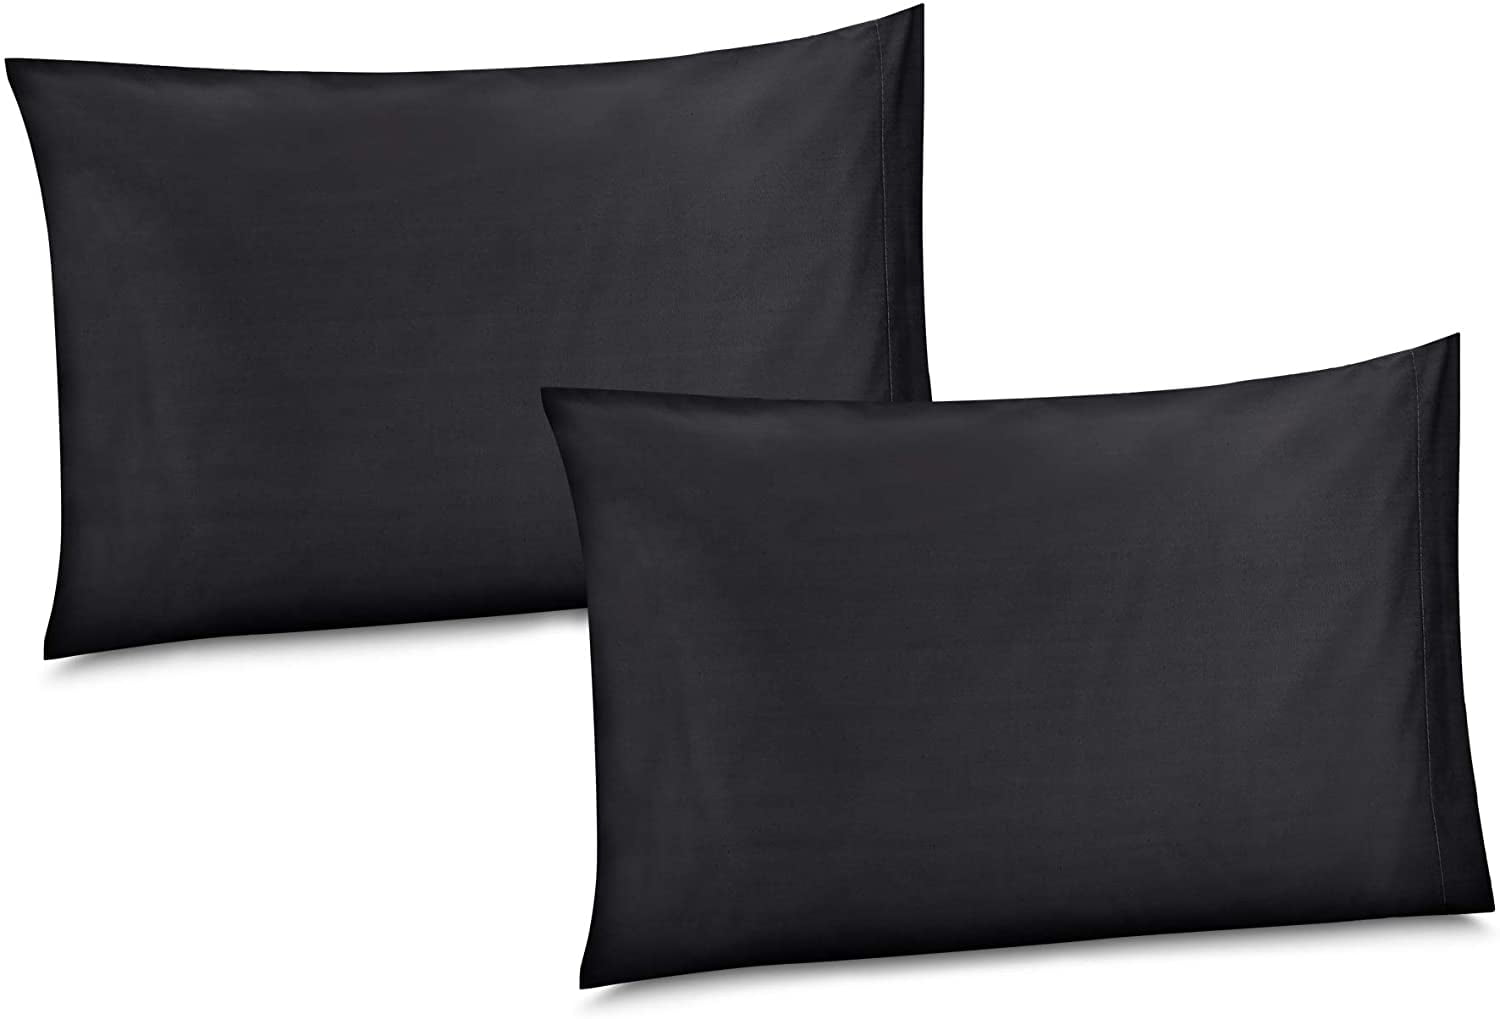 Cases 2 x Charcoal Plain Dyed Pillow Cases Housewife Bedroom Pillow Cover